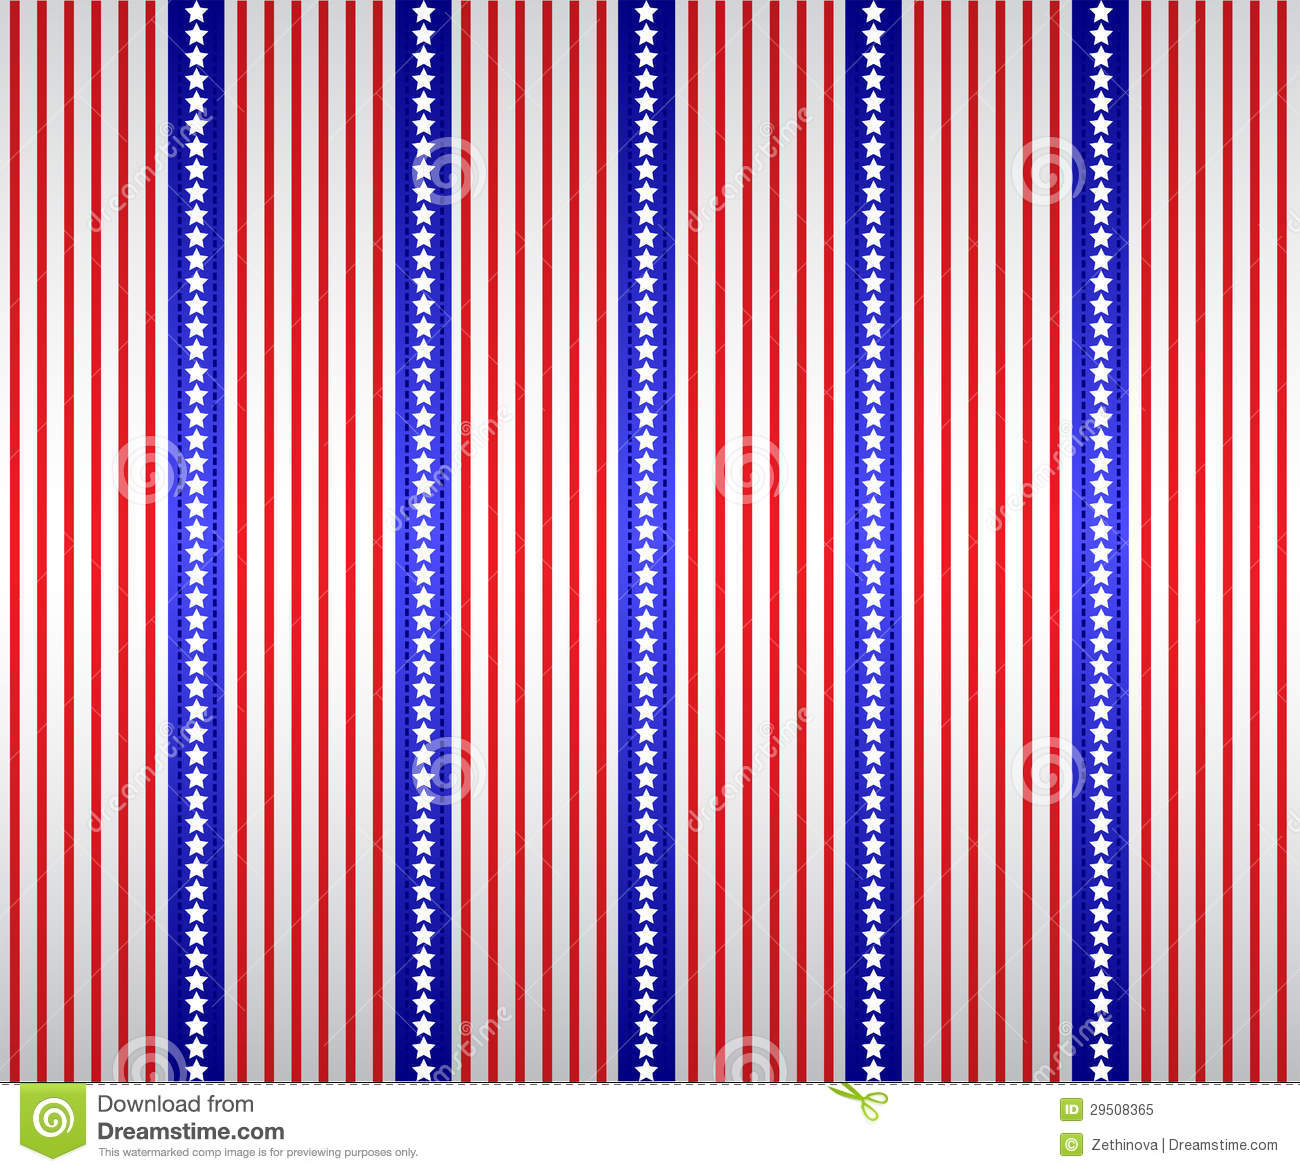 Stars and stripes wallpaper